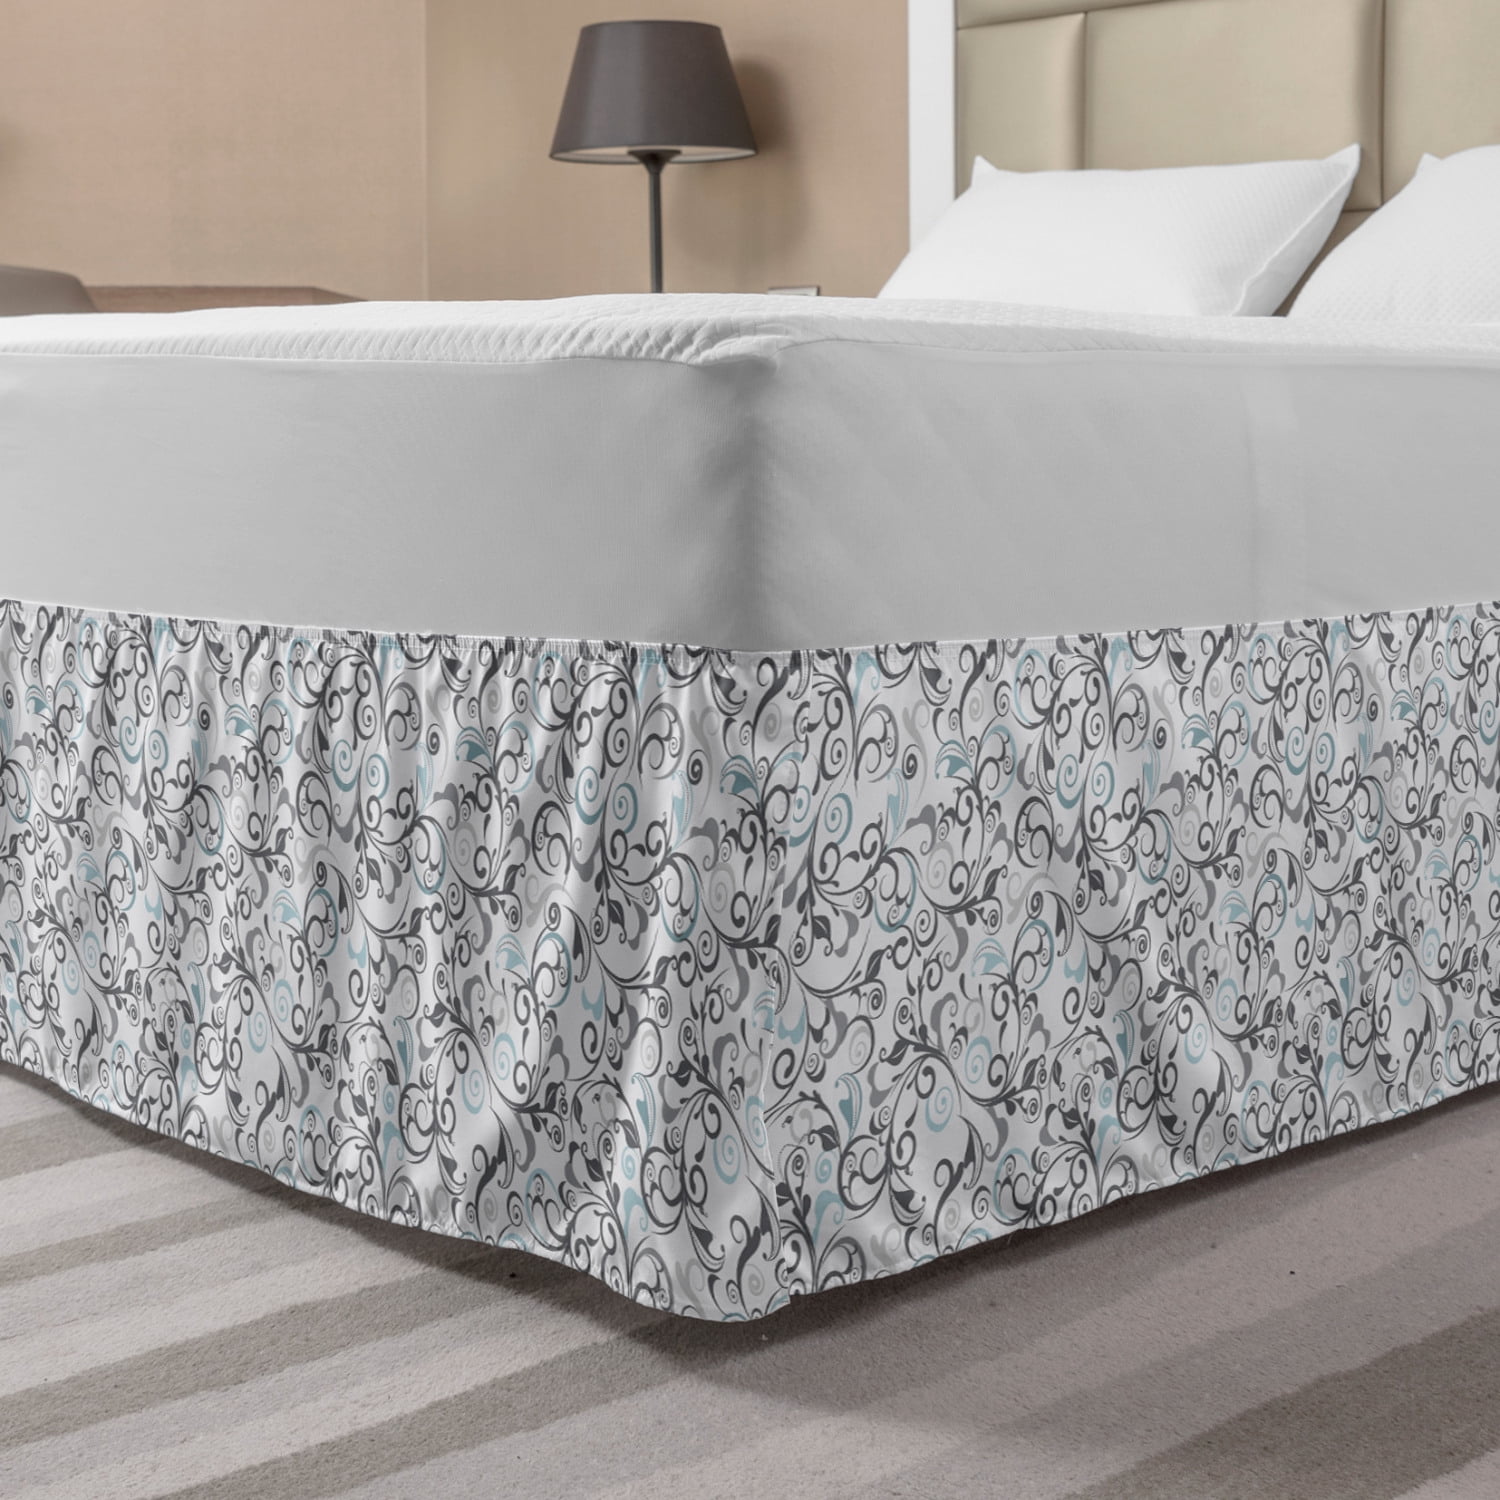 Luxury Linens Wrap Around Bed Skirts 100% Egyptian Cotton 1000 Thread Count 8 Drop Length Twin XL Size Solid Aqua Blue 